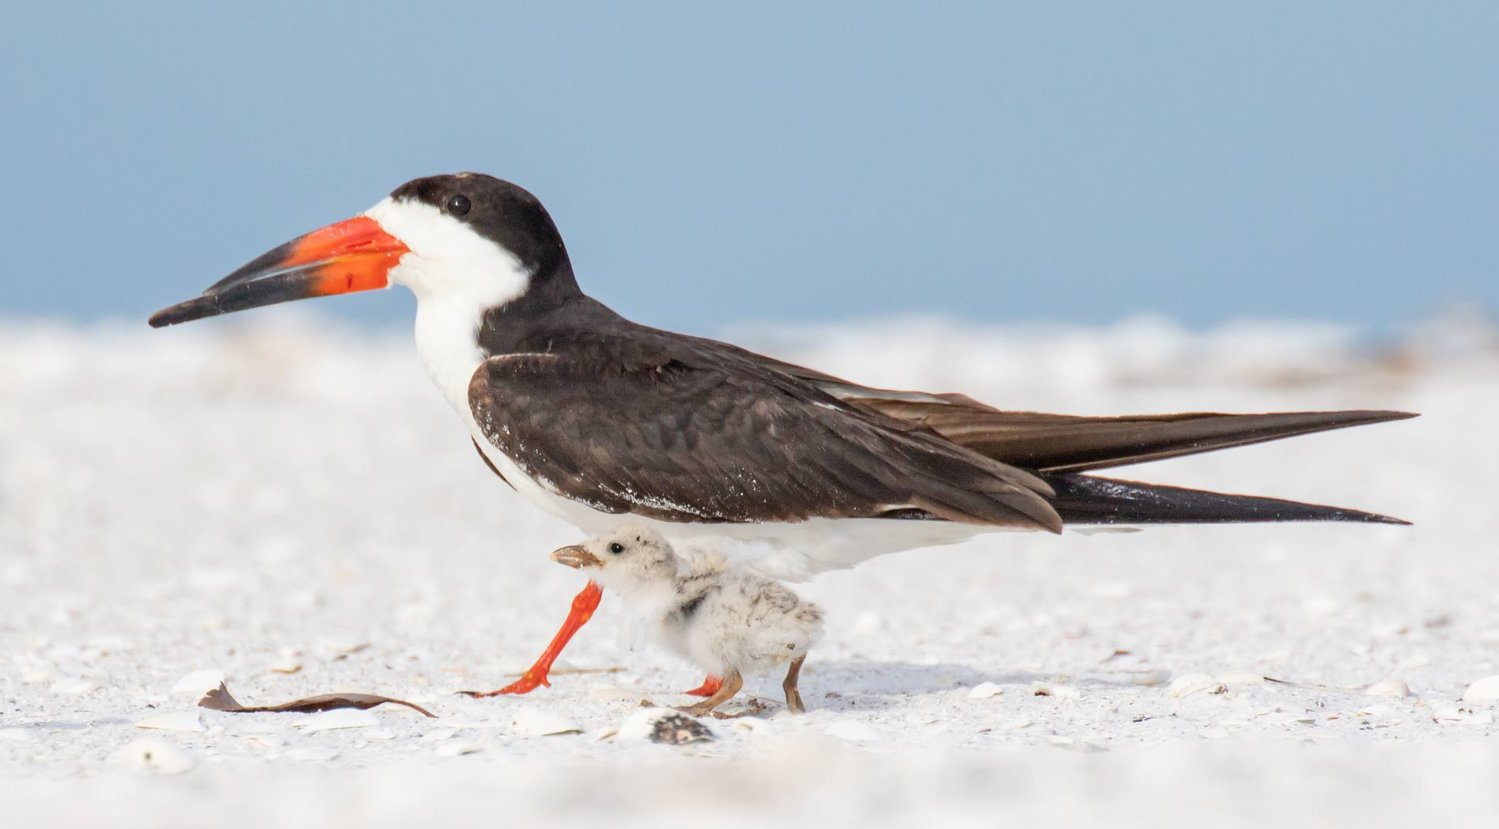 Black Skimmer with chick, photo by Jean Hall